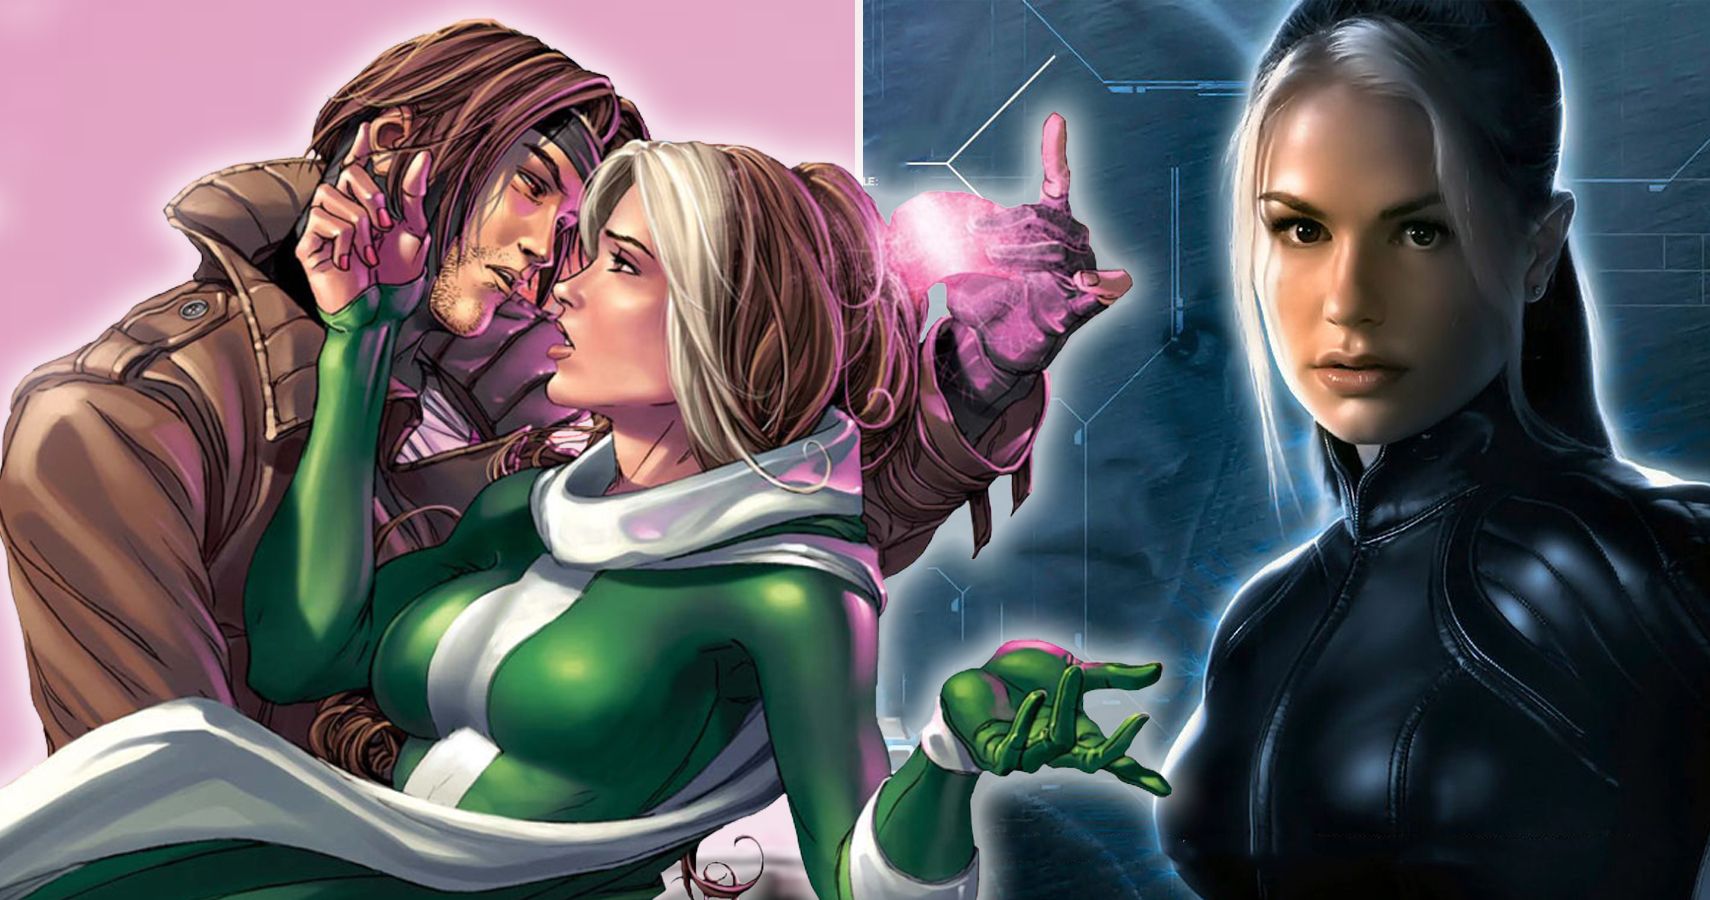 30 Weird Things About Rogue s Body In X Men TheGamer. 